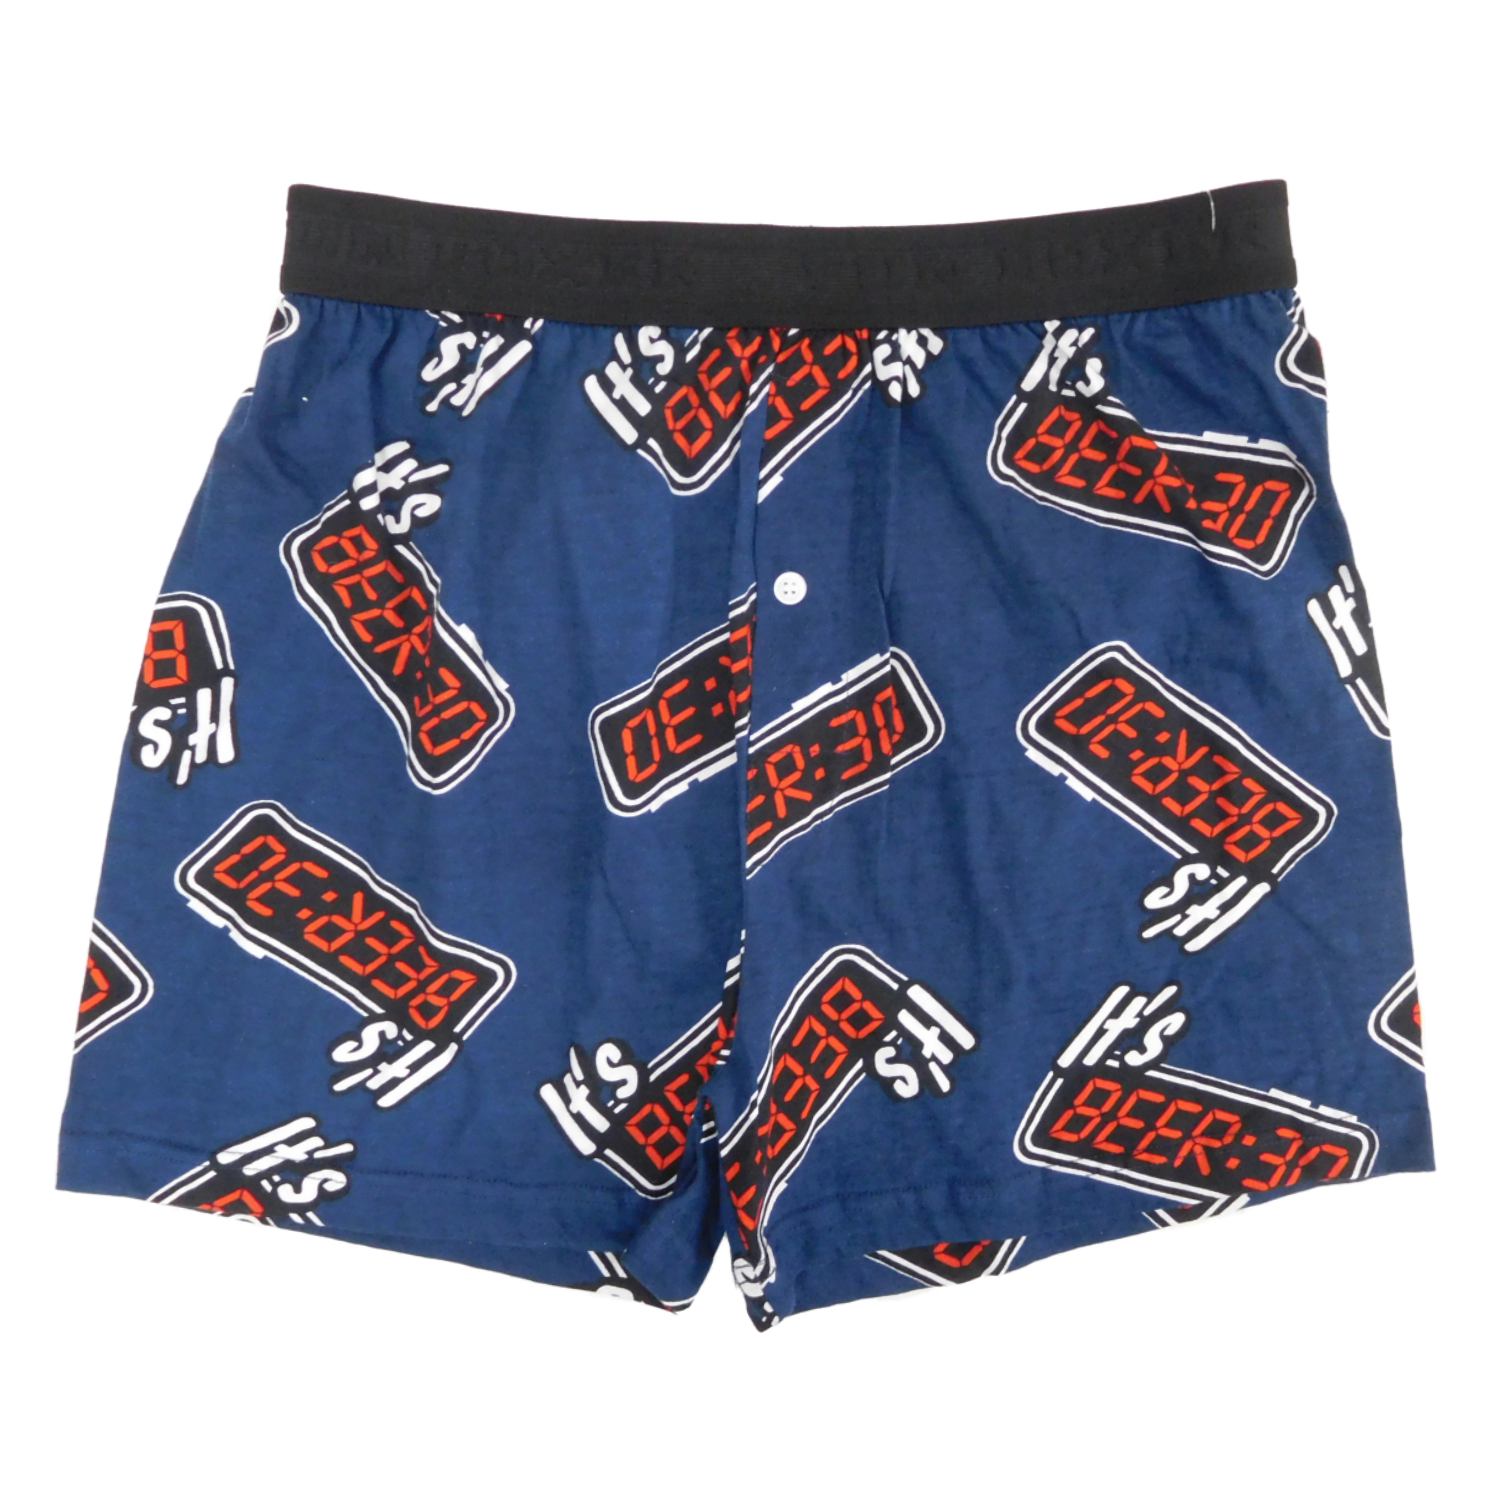 Fun Boxers Mens Blue It's Beer 30 Boxer Shorts Small